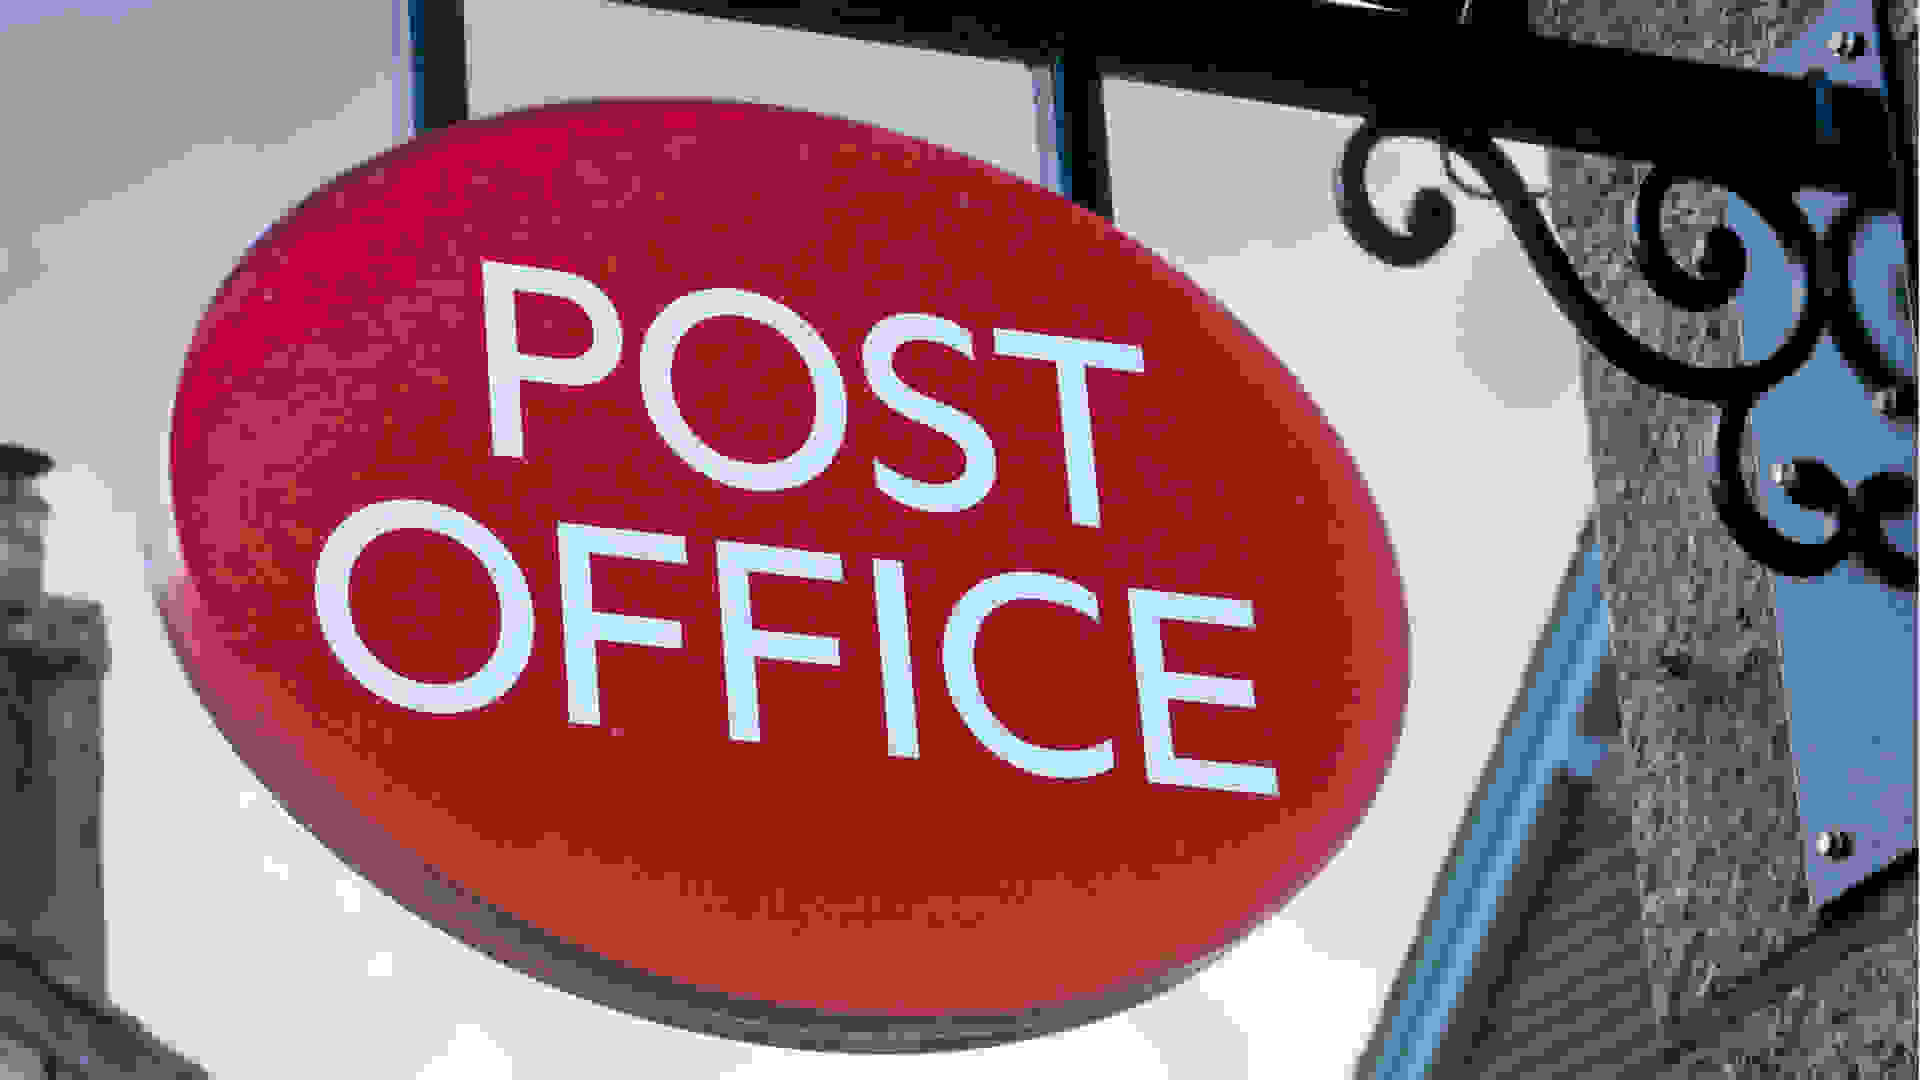 A branch of the Post Office. ©Adobe Stock